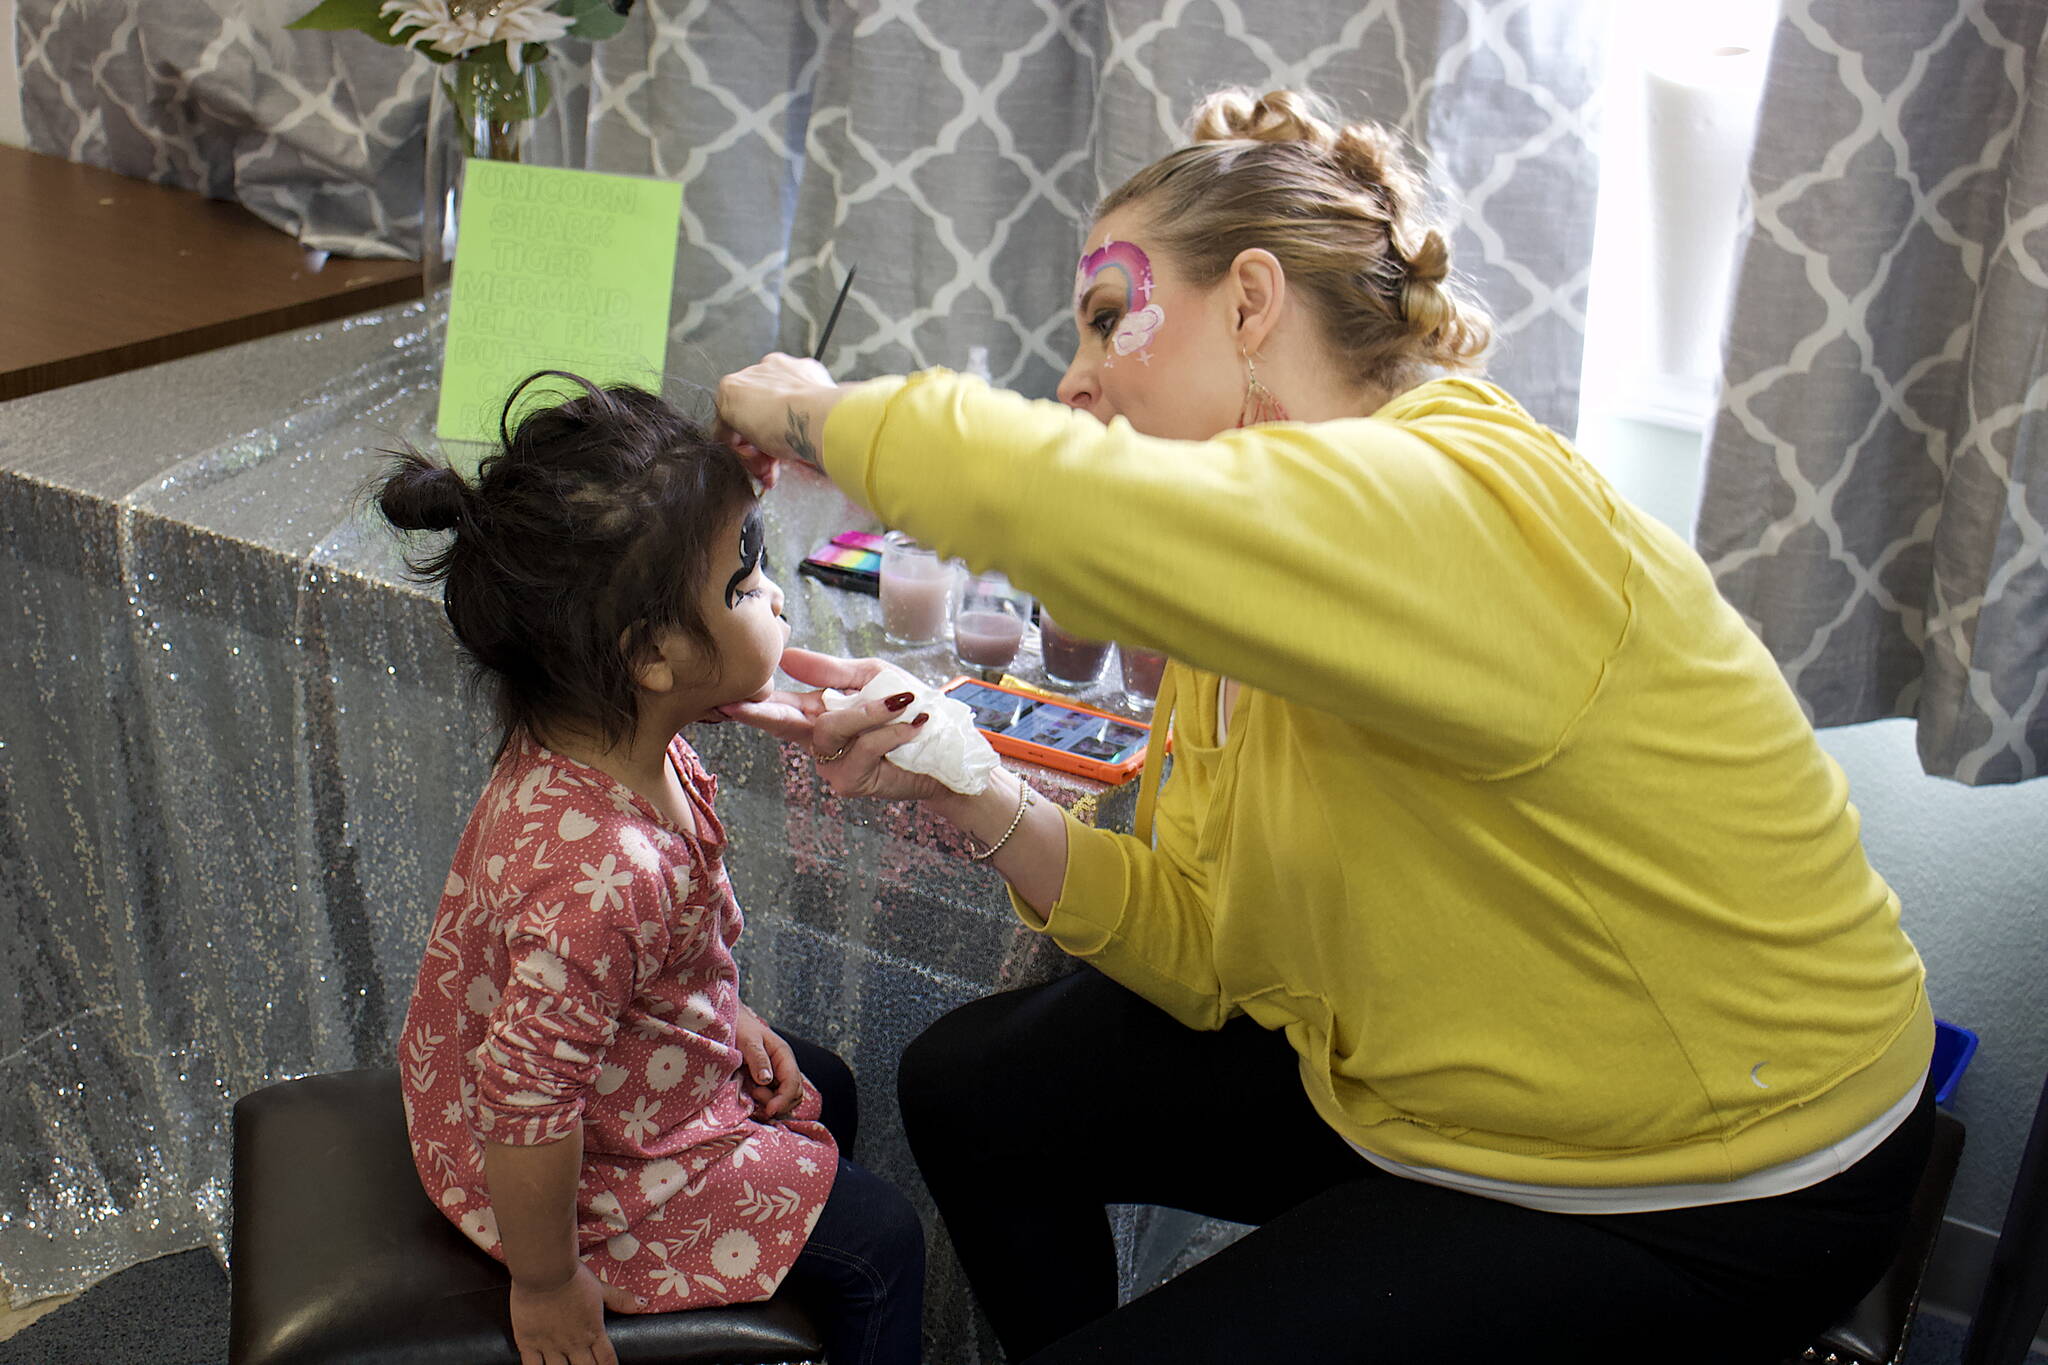 Angel White, 2, gets her face painted by Jennifer Skinner inside St. Vincent de Paul Juneau’s Teal Street complex on Saturday as part of a Friends of the Poor Run/Walk to raise money for the facility and its programs. (Mark Sabbatini / Juneau Empire)